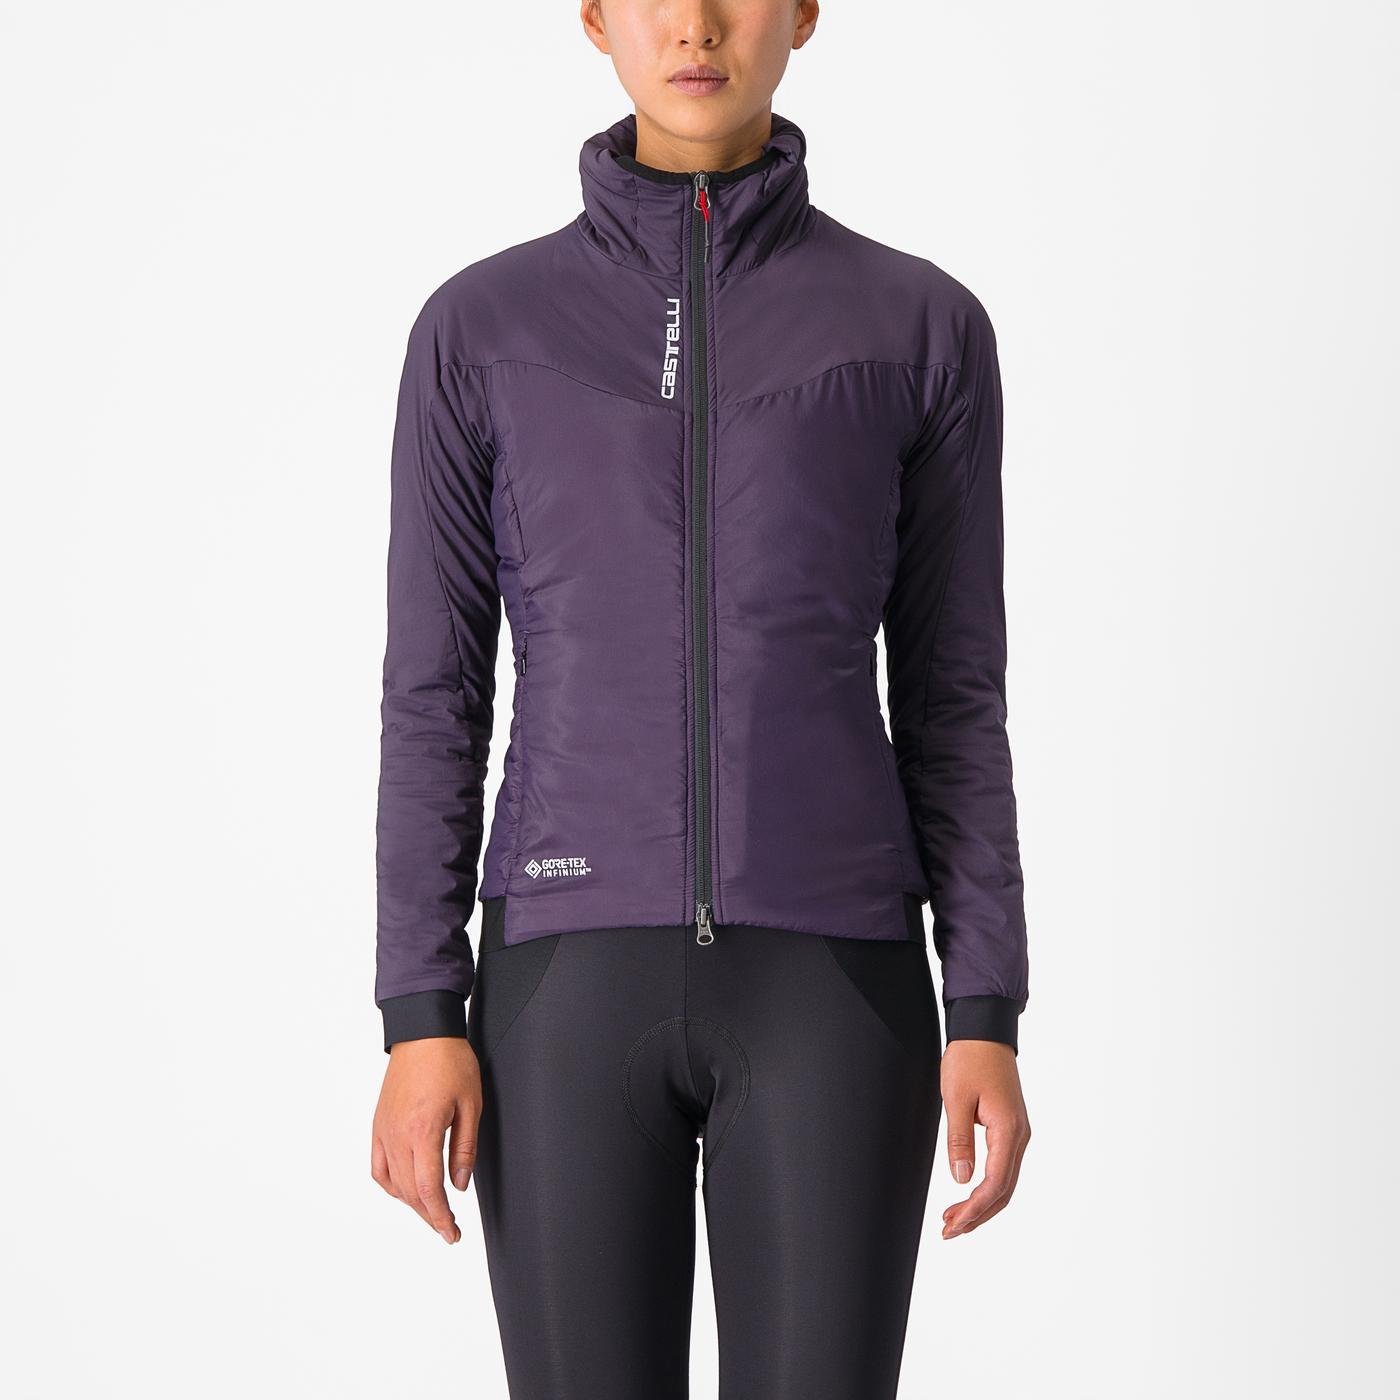 W JACKET Castelli - Cycling FLY Cycling THERMAL Woman Jackets